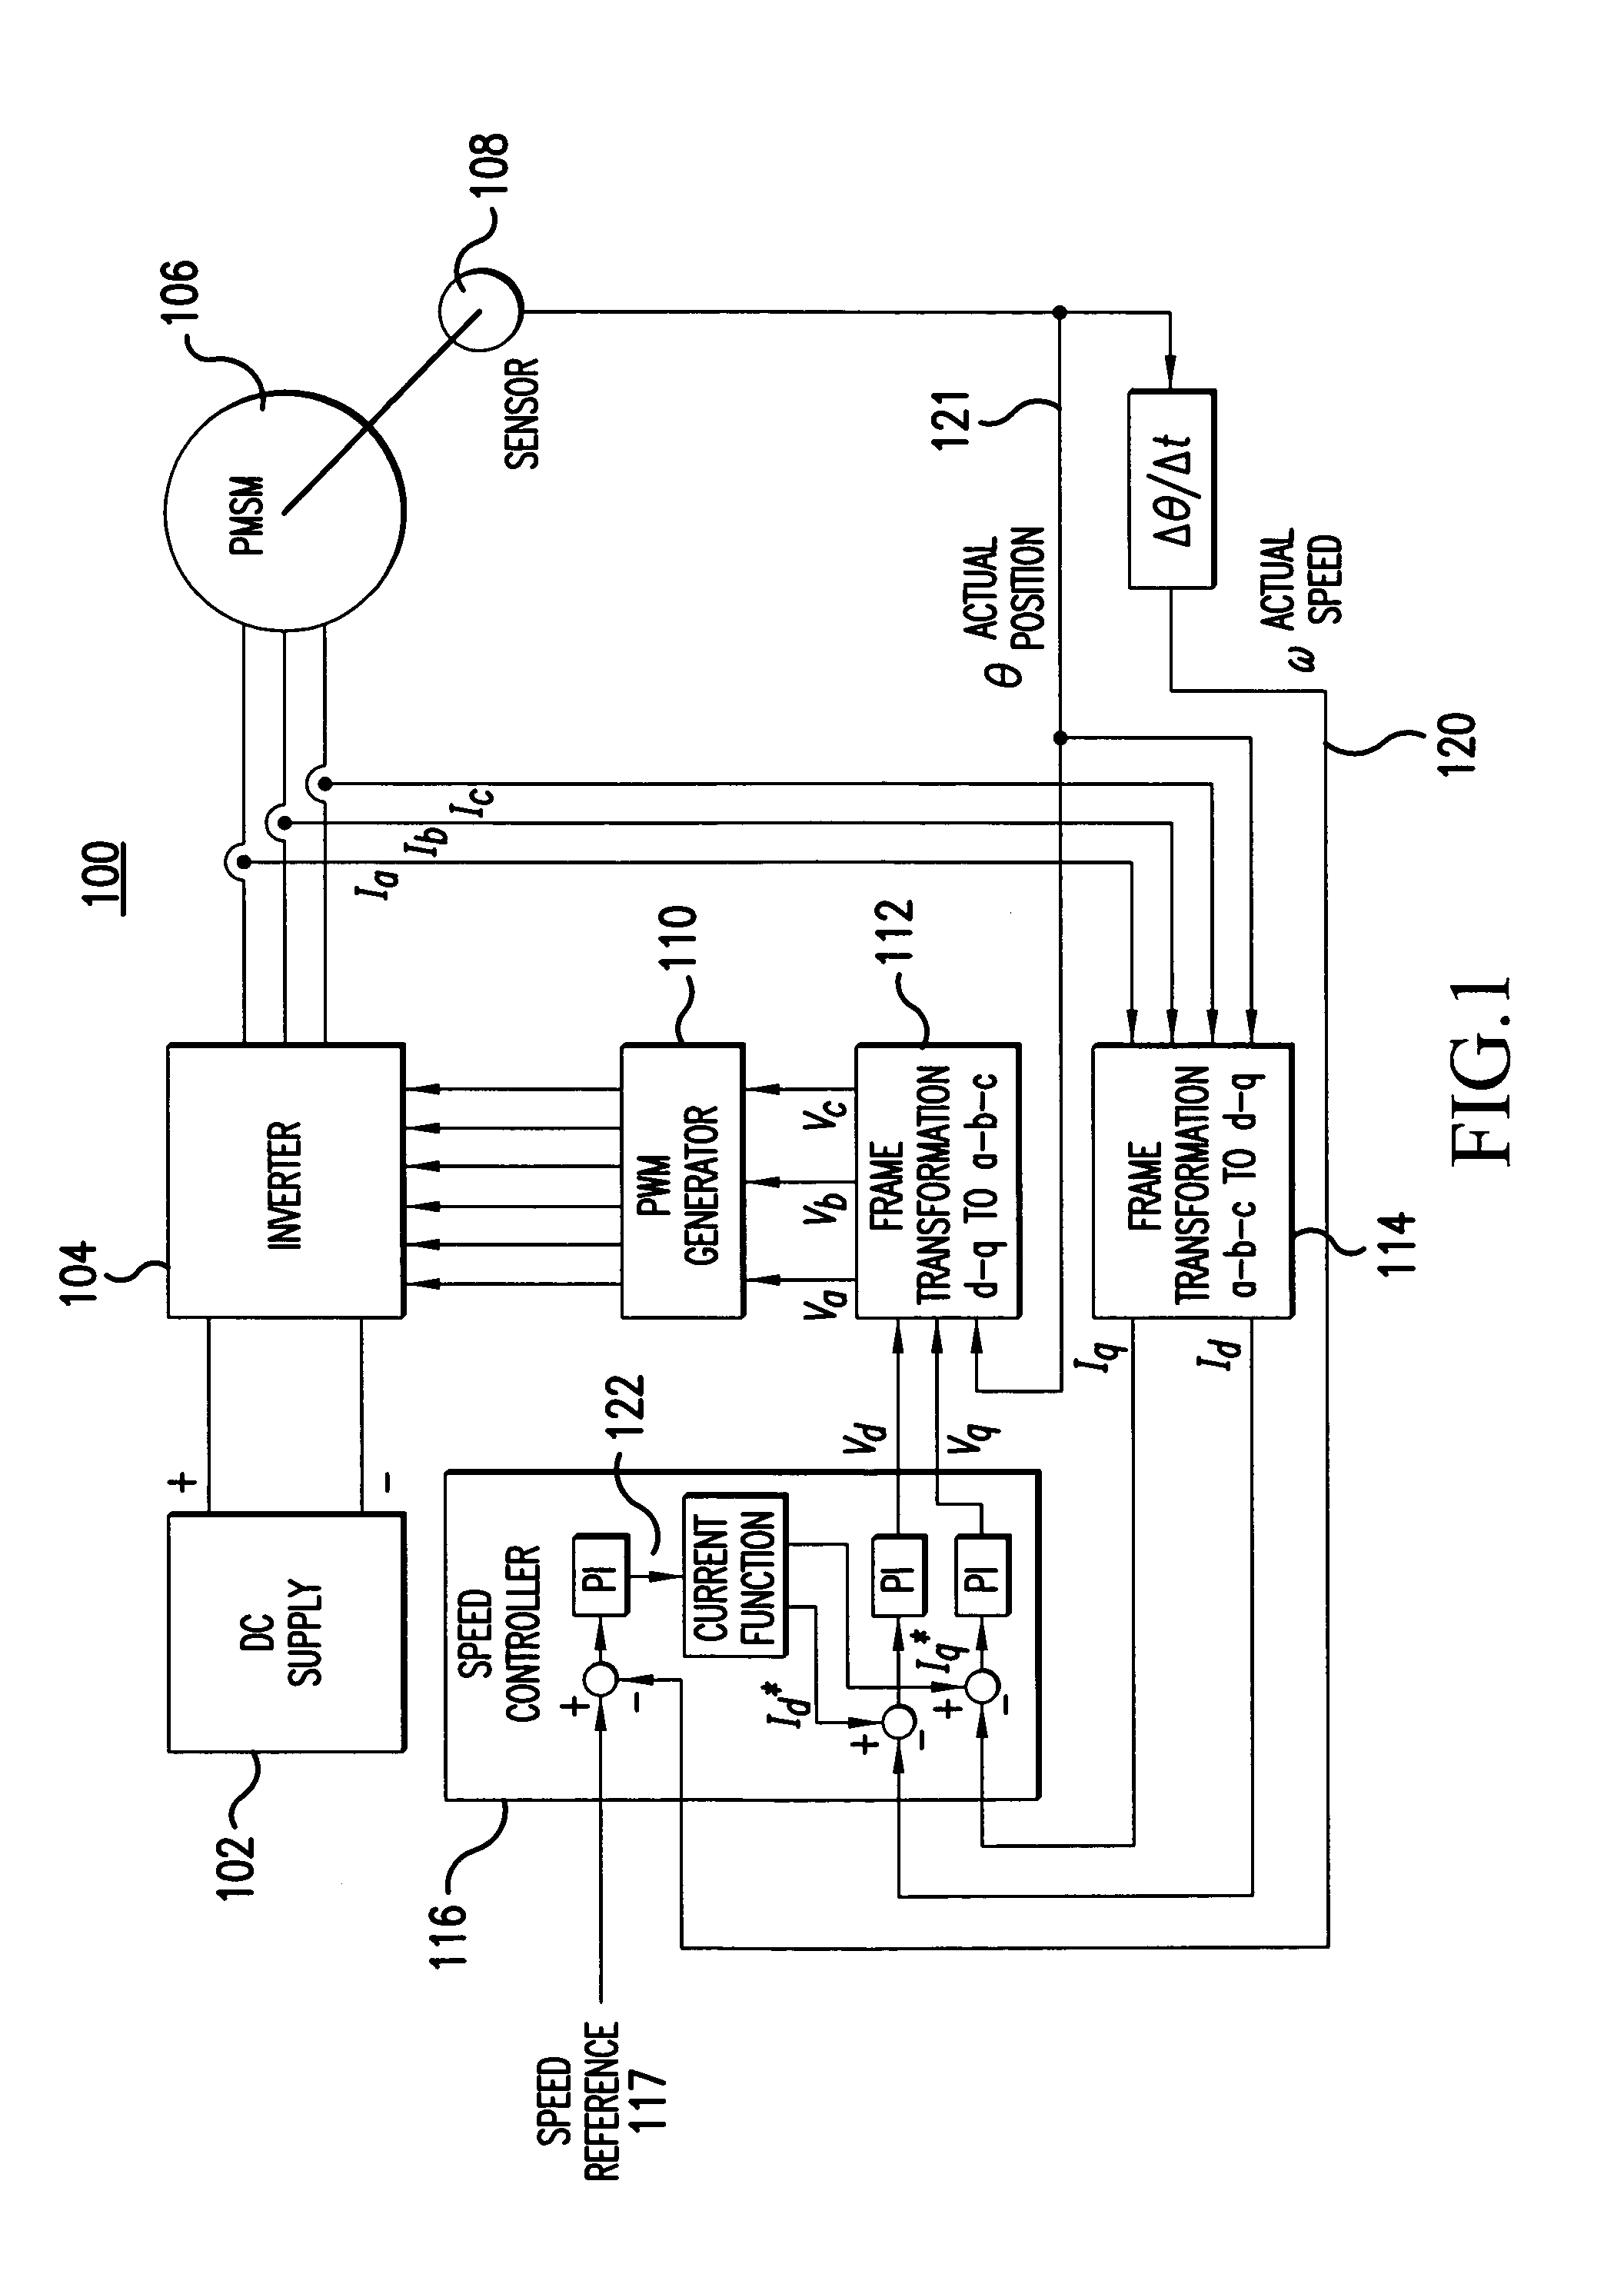 Sensorless control method and apparatus for a motor drive system